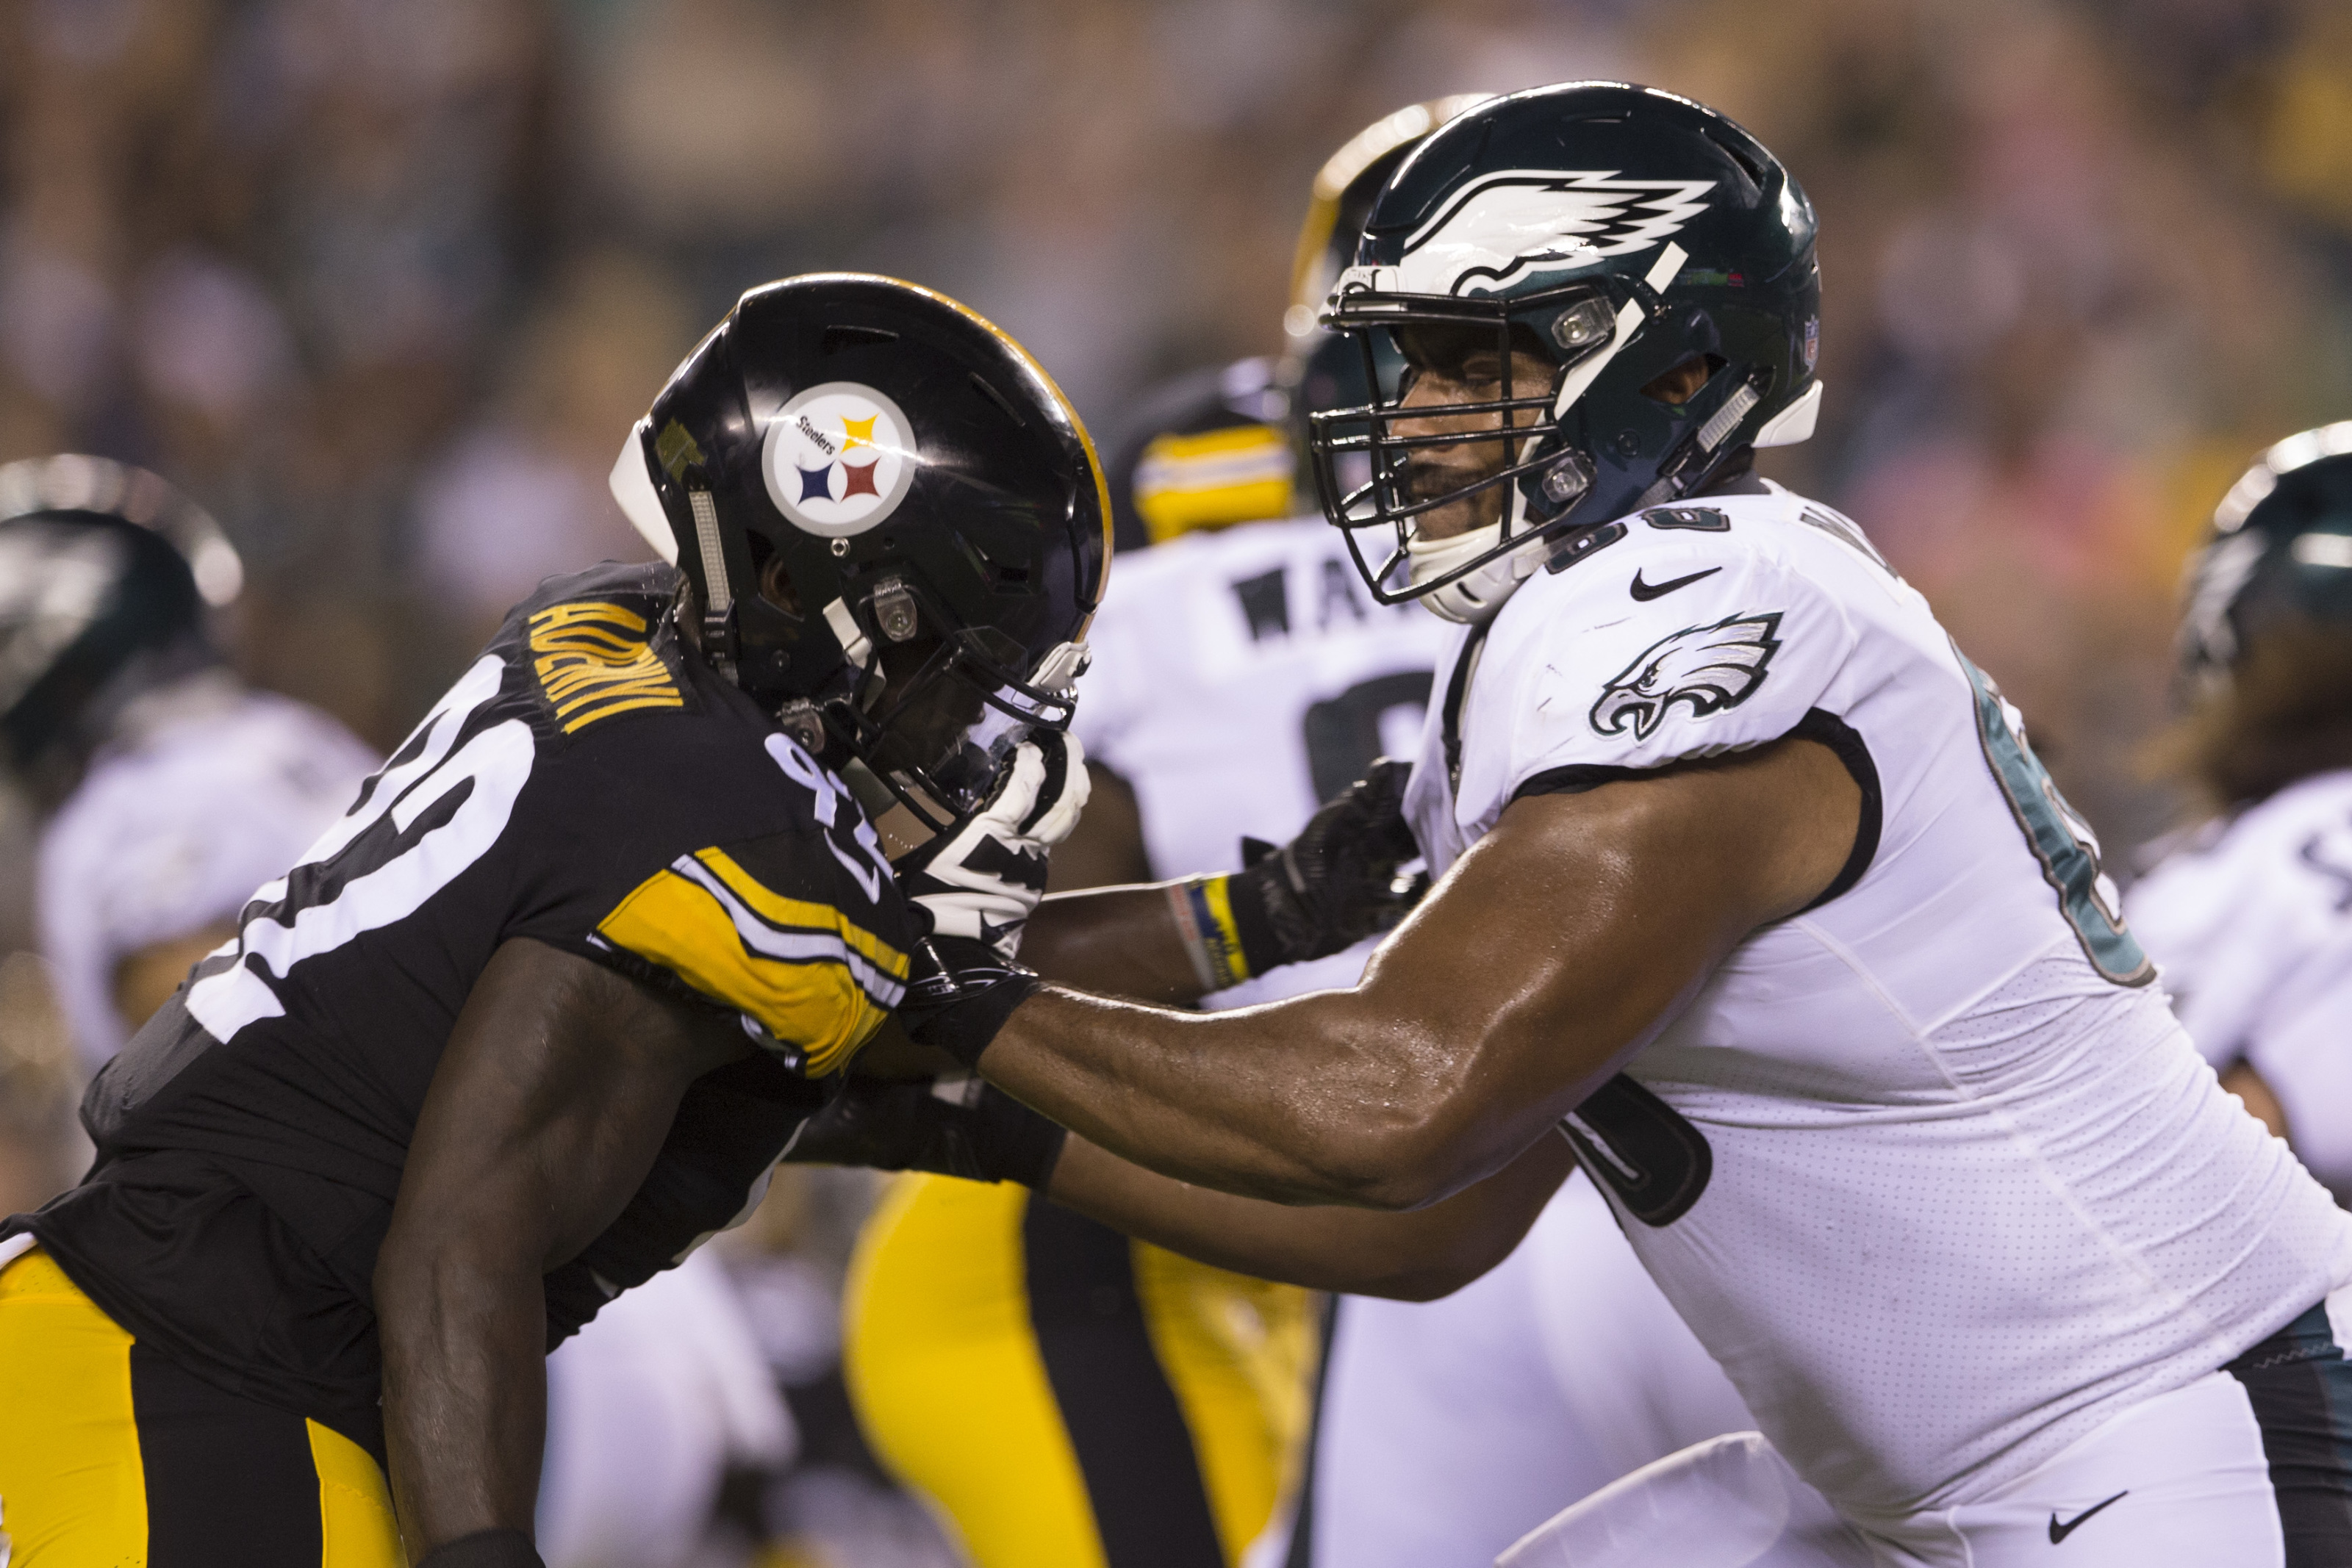 Steelers vs. Eagles: An underrated in-state rivalry renewed